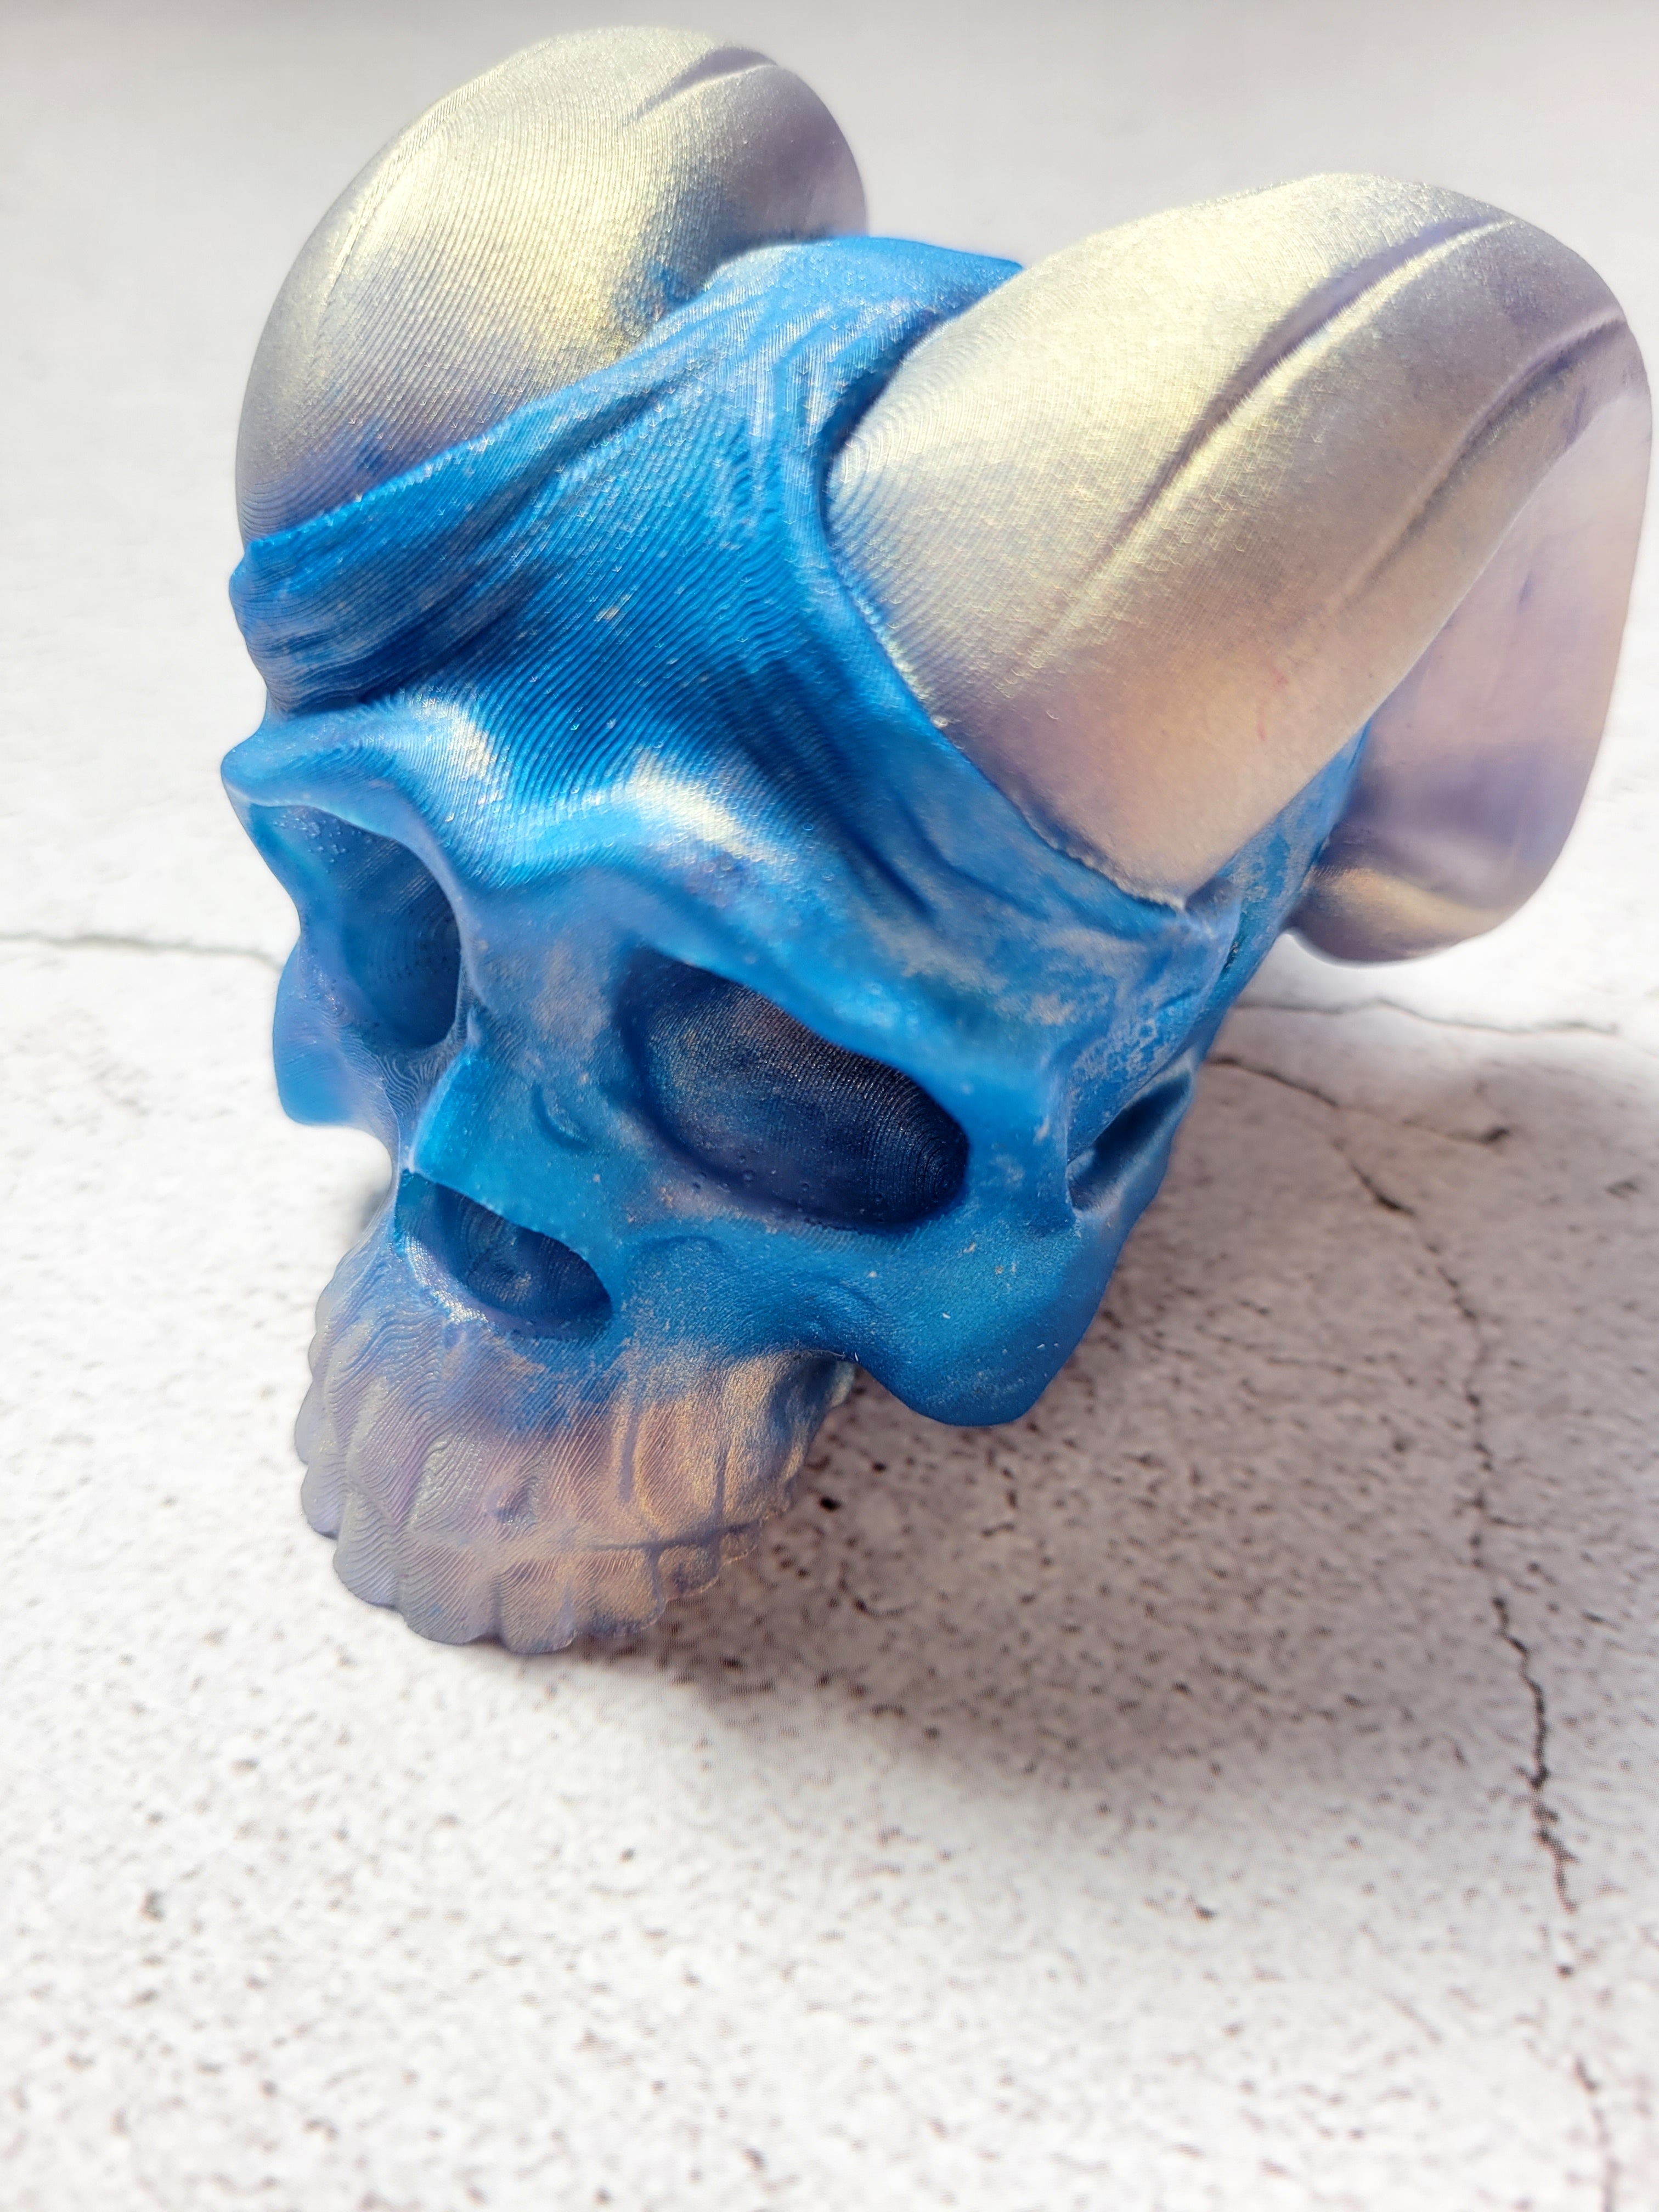 A front view of a skull with curved horns. it's teeth and horns are silver. The skull is blue.